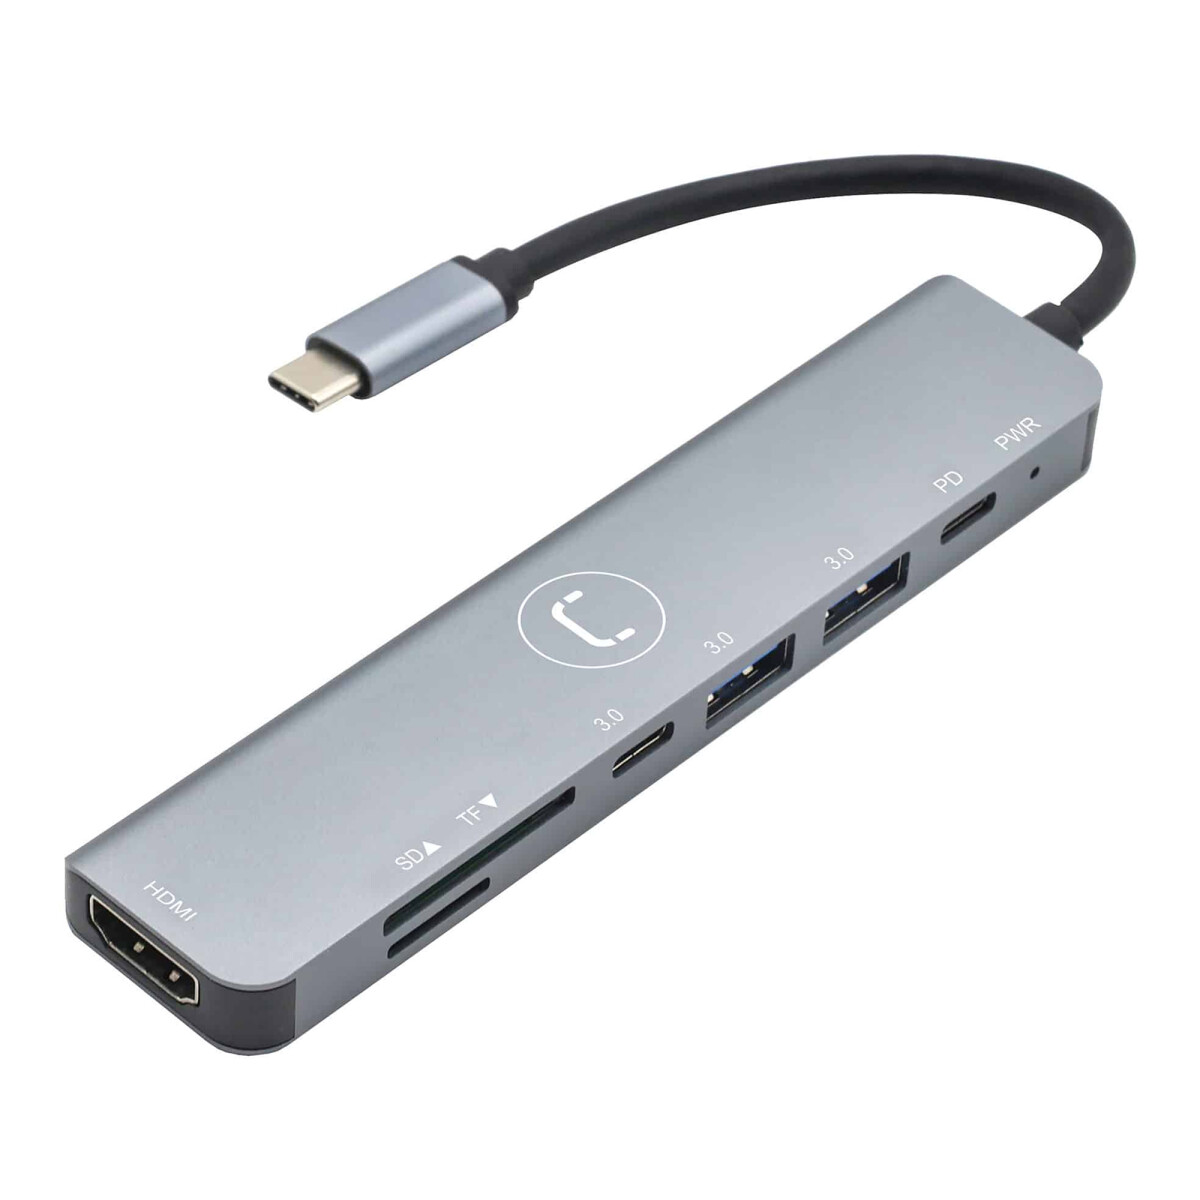 Unno - Hub usb C 7 en 1 HB1107SV - 1 HDMI / 1 Pd / 2 USB a / 1 USB C / 1 Sd / 1 Micro Sd. Android / - 001 